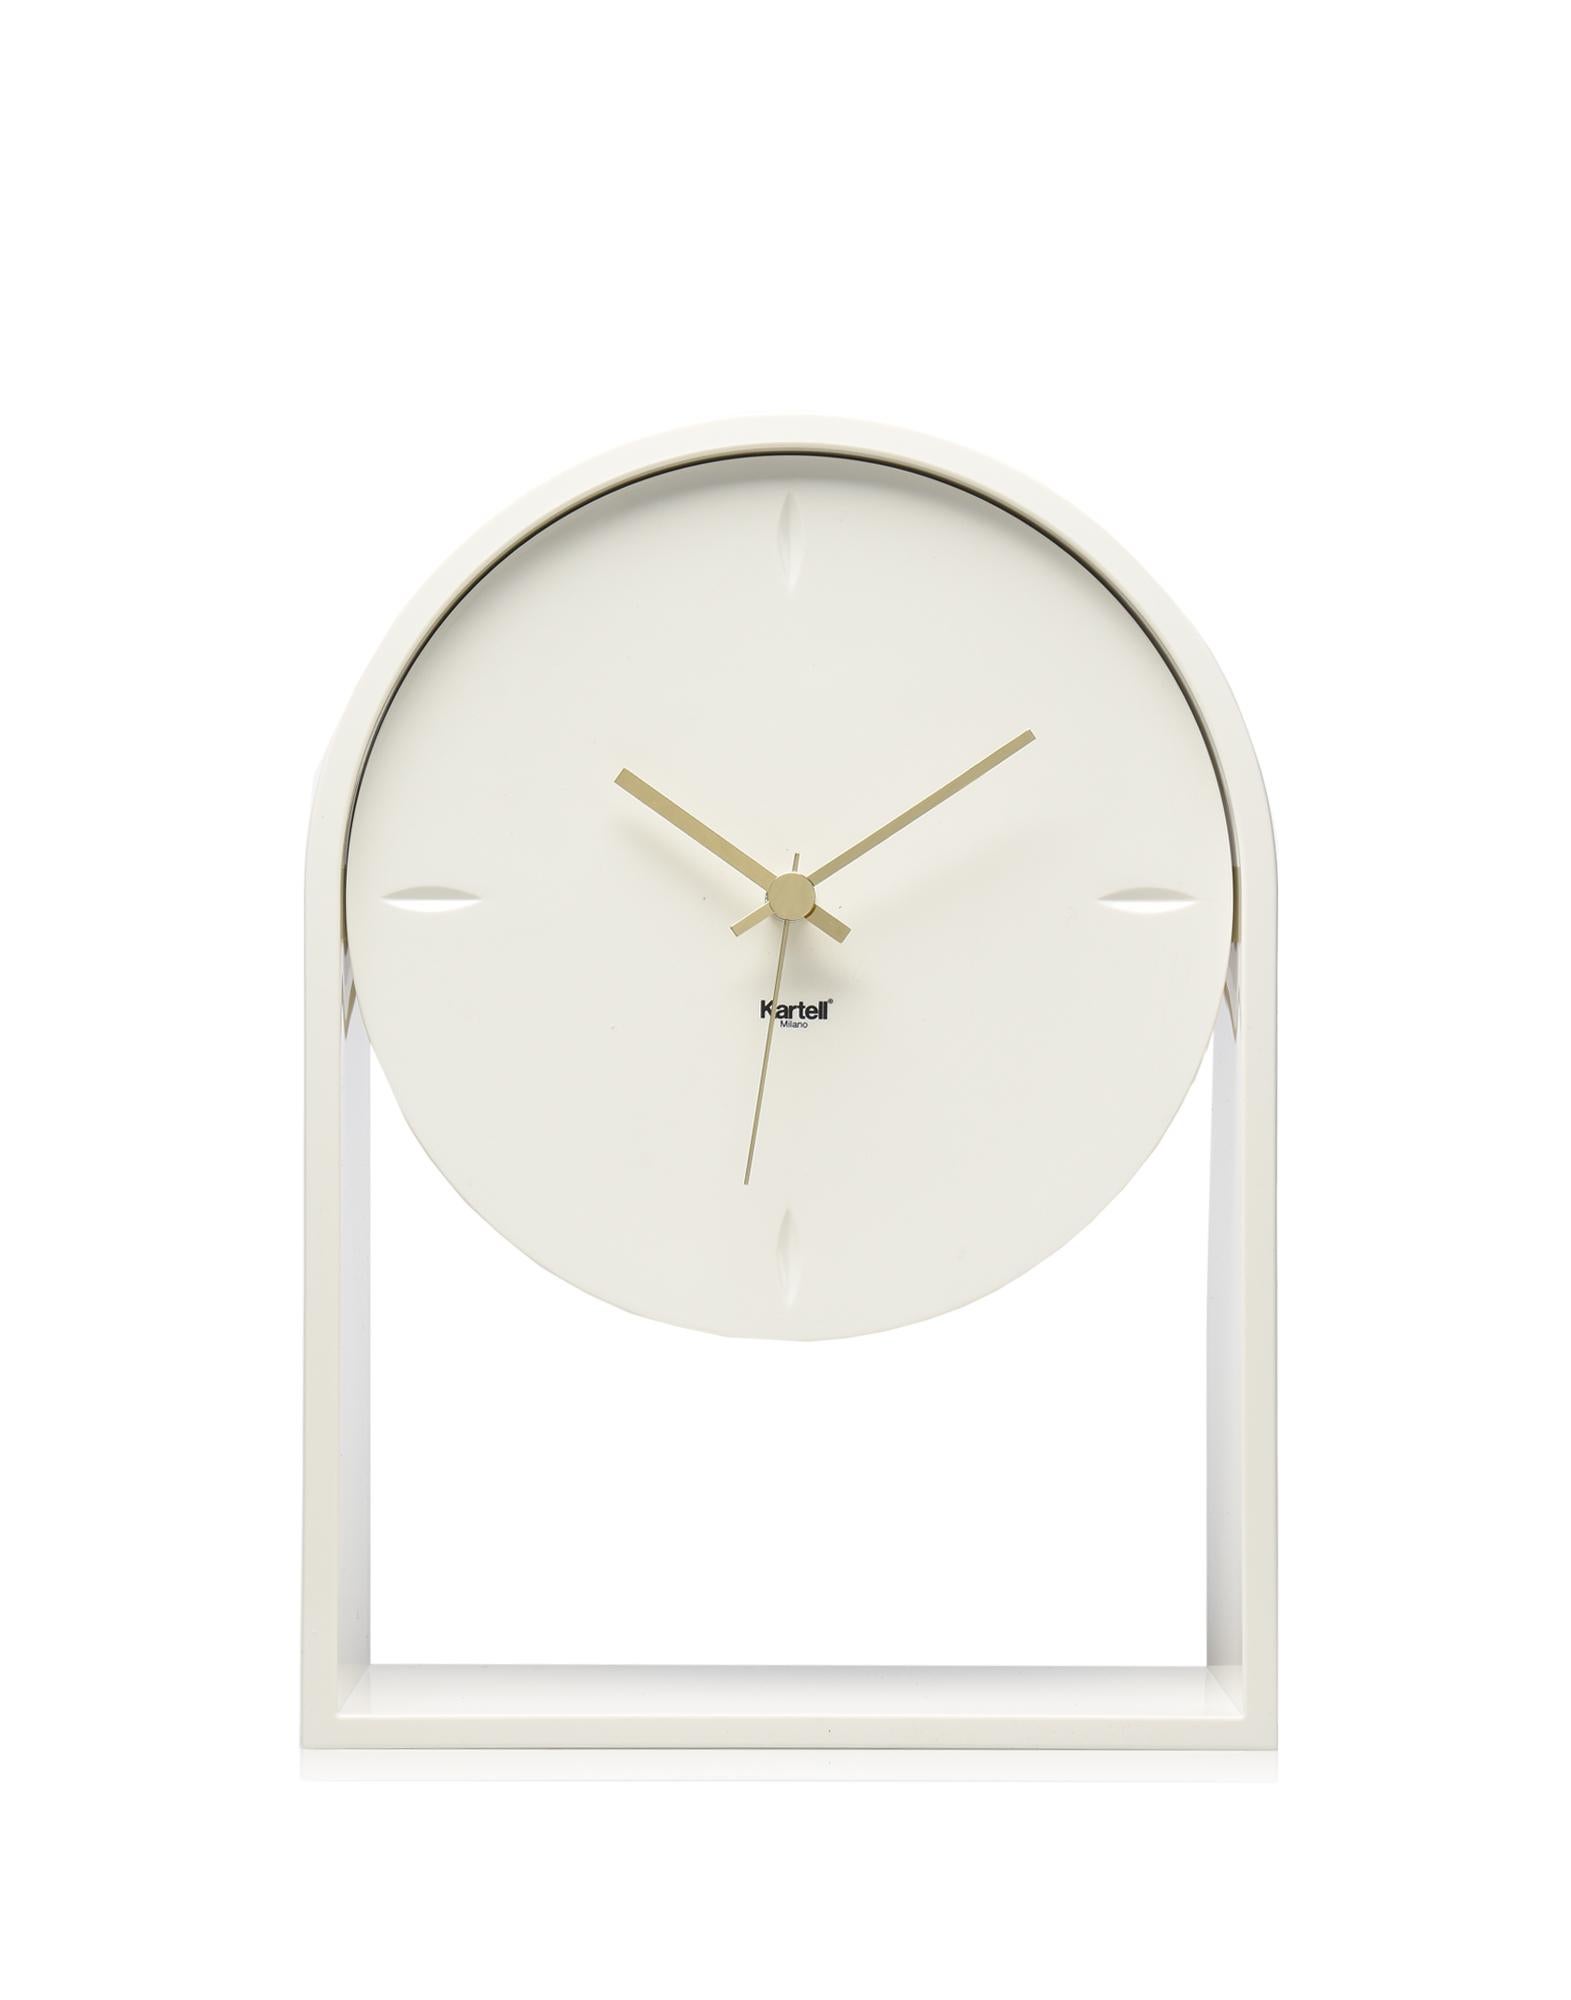 Contemporary Kartell Air Du Temps  Table Clock in Crystal Gold by Eugeni Quitllet For Sale